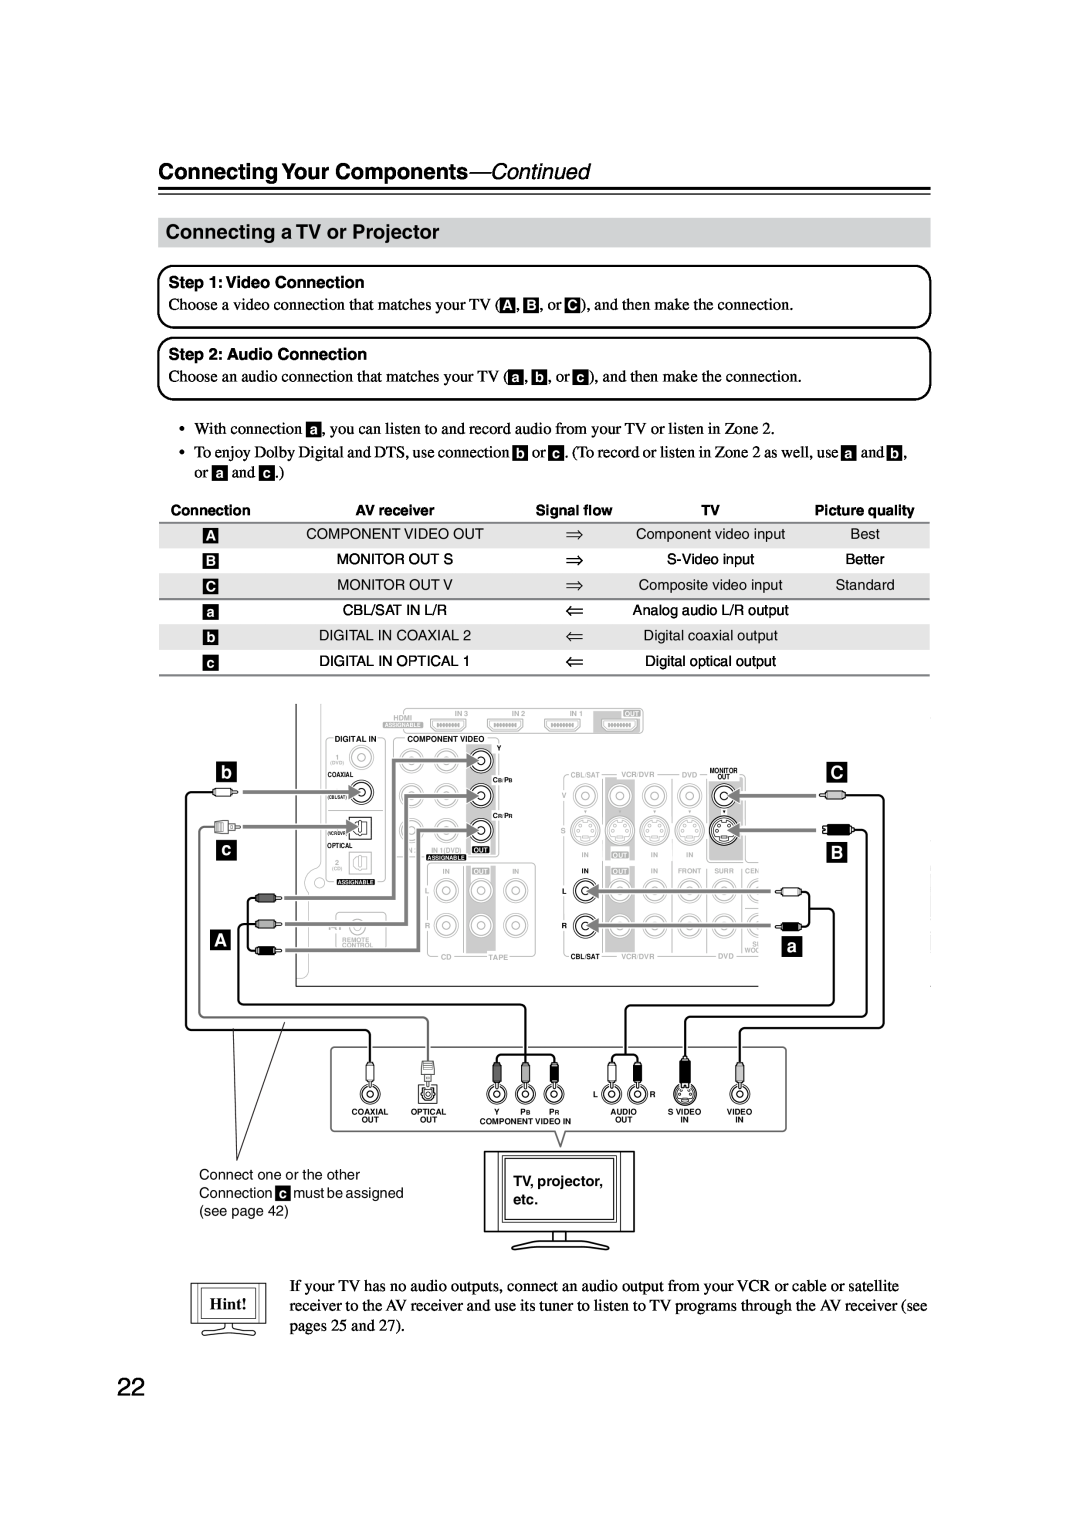 Onkyo TX-SR506, TX-SR576 instruction manual Connecting a TV or Projector, b c A, Connecting Your Components—Continued, Hint 